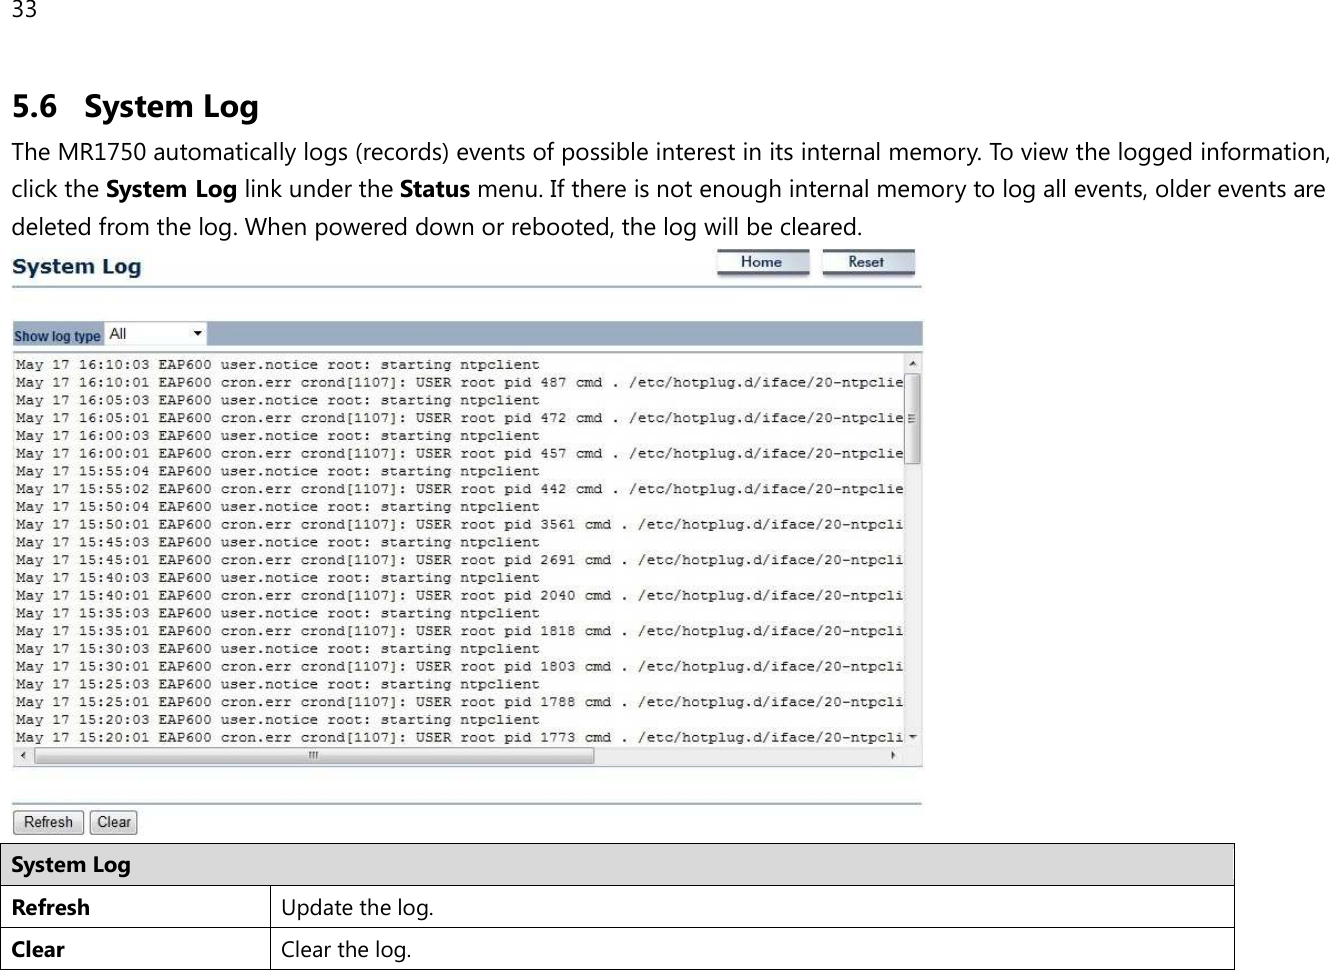 33  5.6 System Log The MR1750 automatically logs (records) events of possible interest in its internal memory. To view the logged information, click the System Log link under the Status menu. If there is not enough internal memory to log all events, older events are deleted from the log. When powered down or rebooted, the log will be cleared.  System Log Refresh Update the log. Clear Clear the log.  